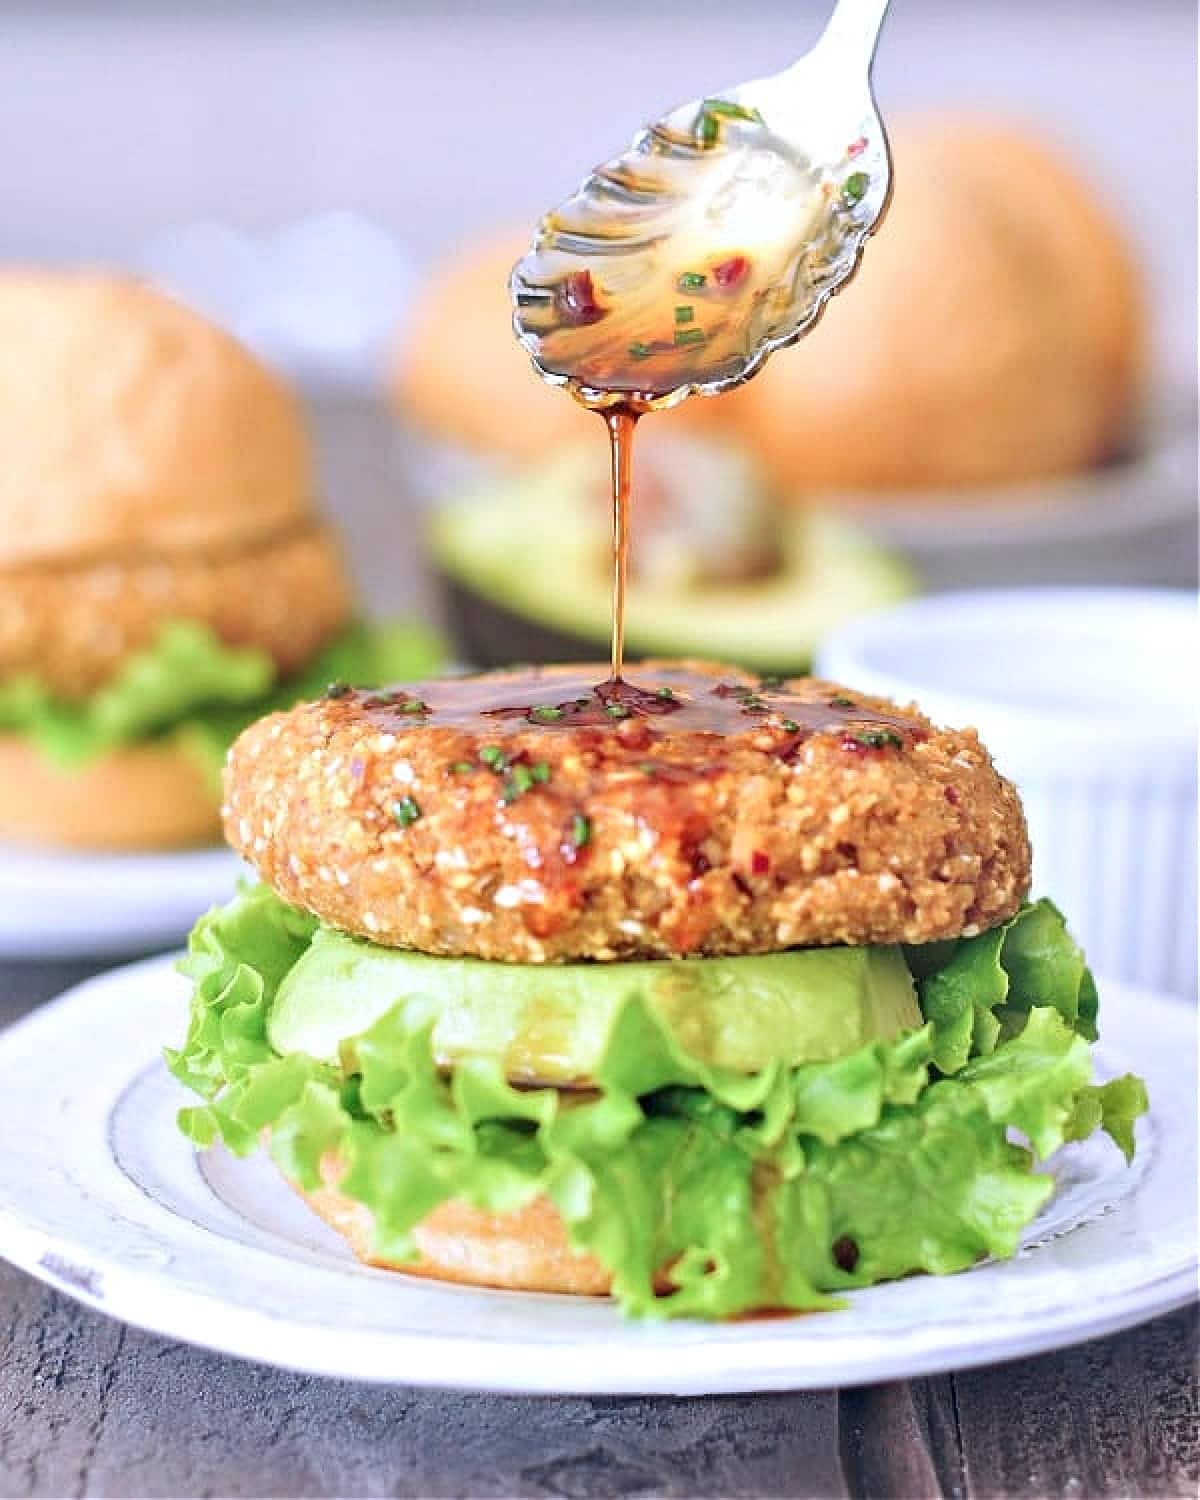 A ginger sesame teriyaki burger sitting on a bottom bun with lettuce and a thick slice of avocado, with more teriyaki sauce being spooned on top of the burger. Top bun blurred in background with a half of avocado, more burgers and buns.